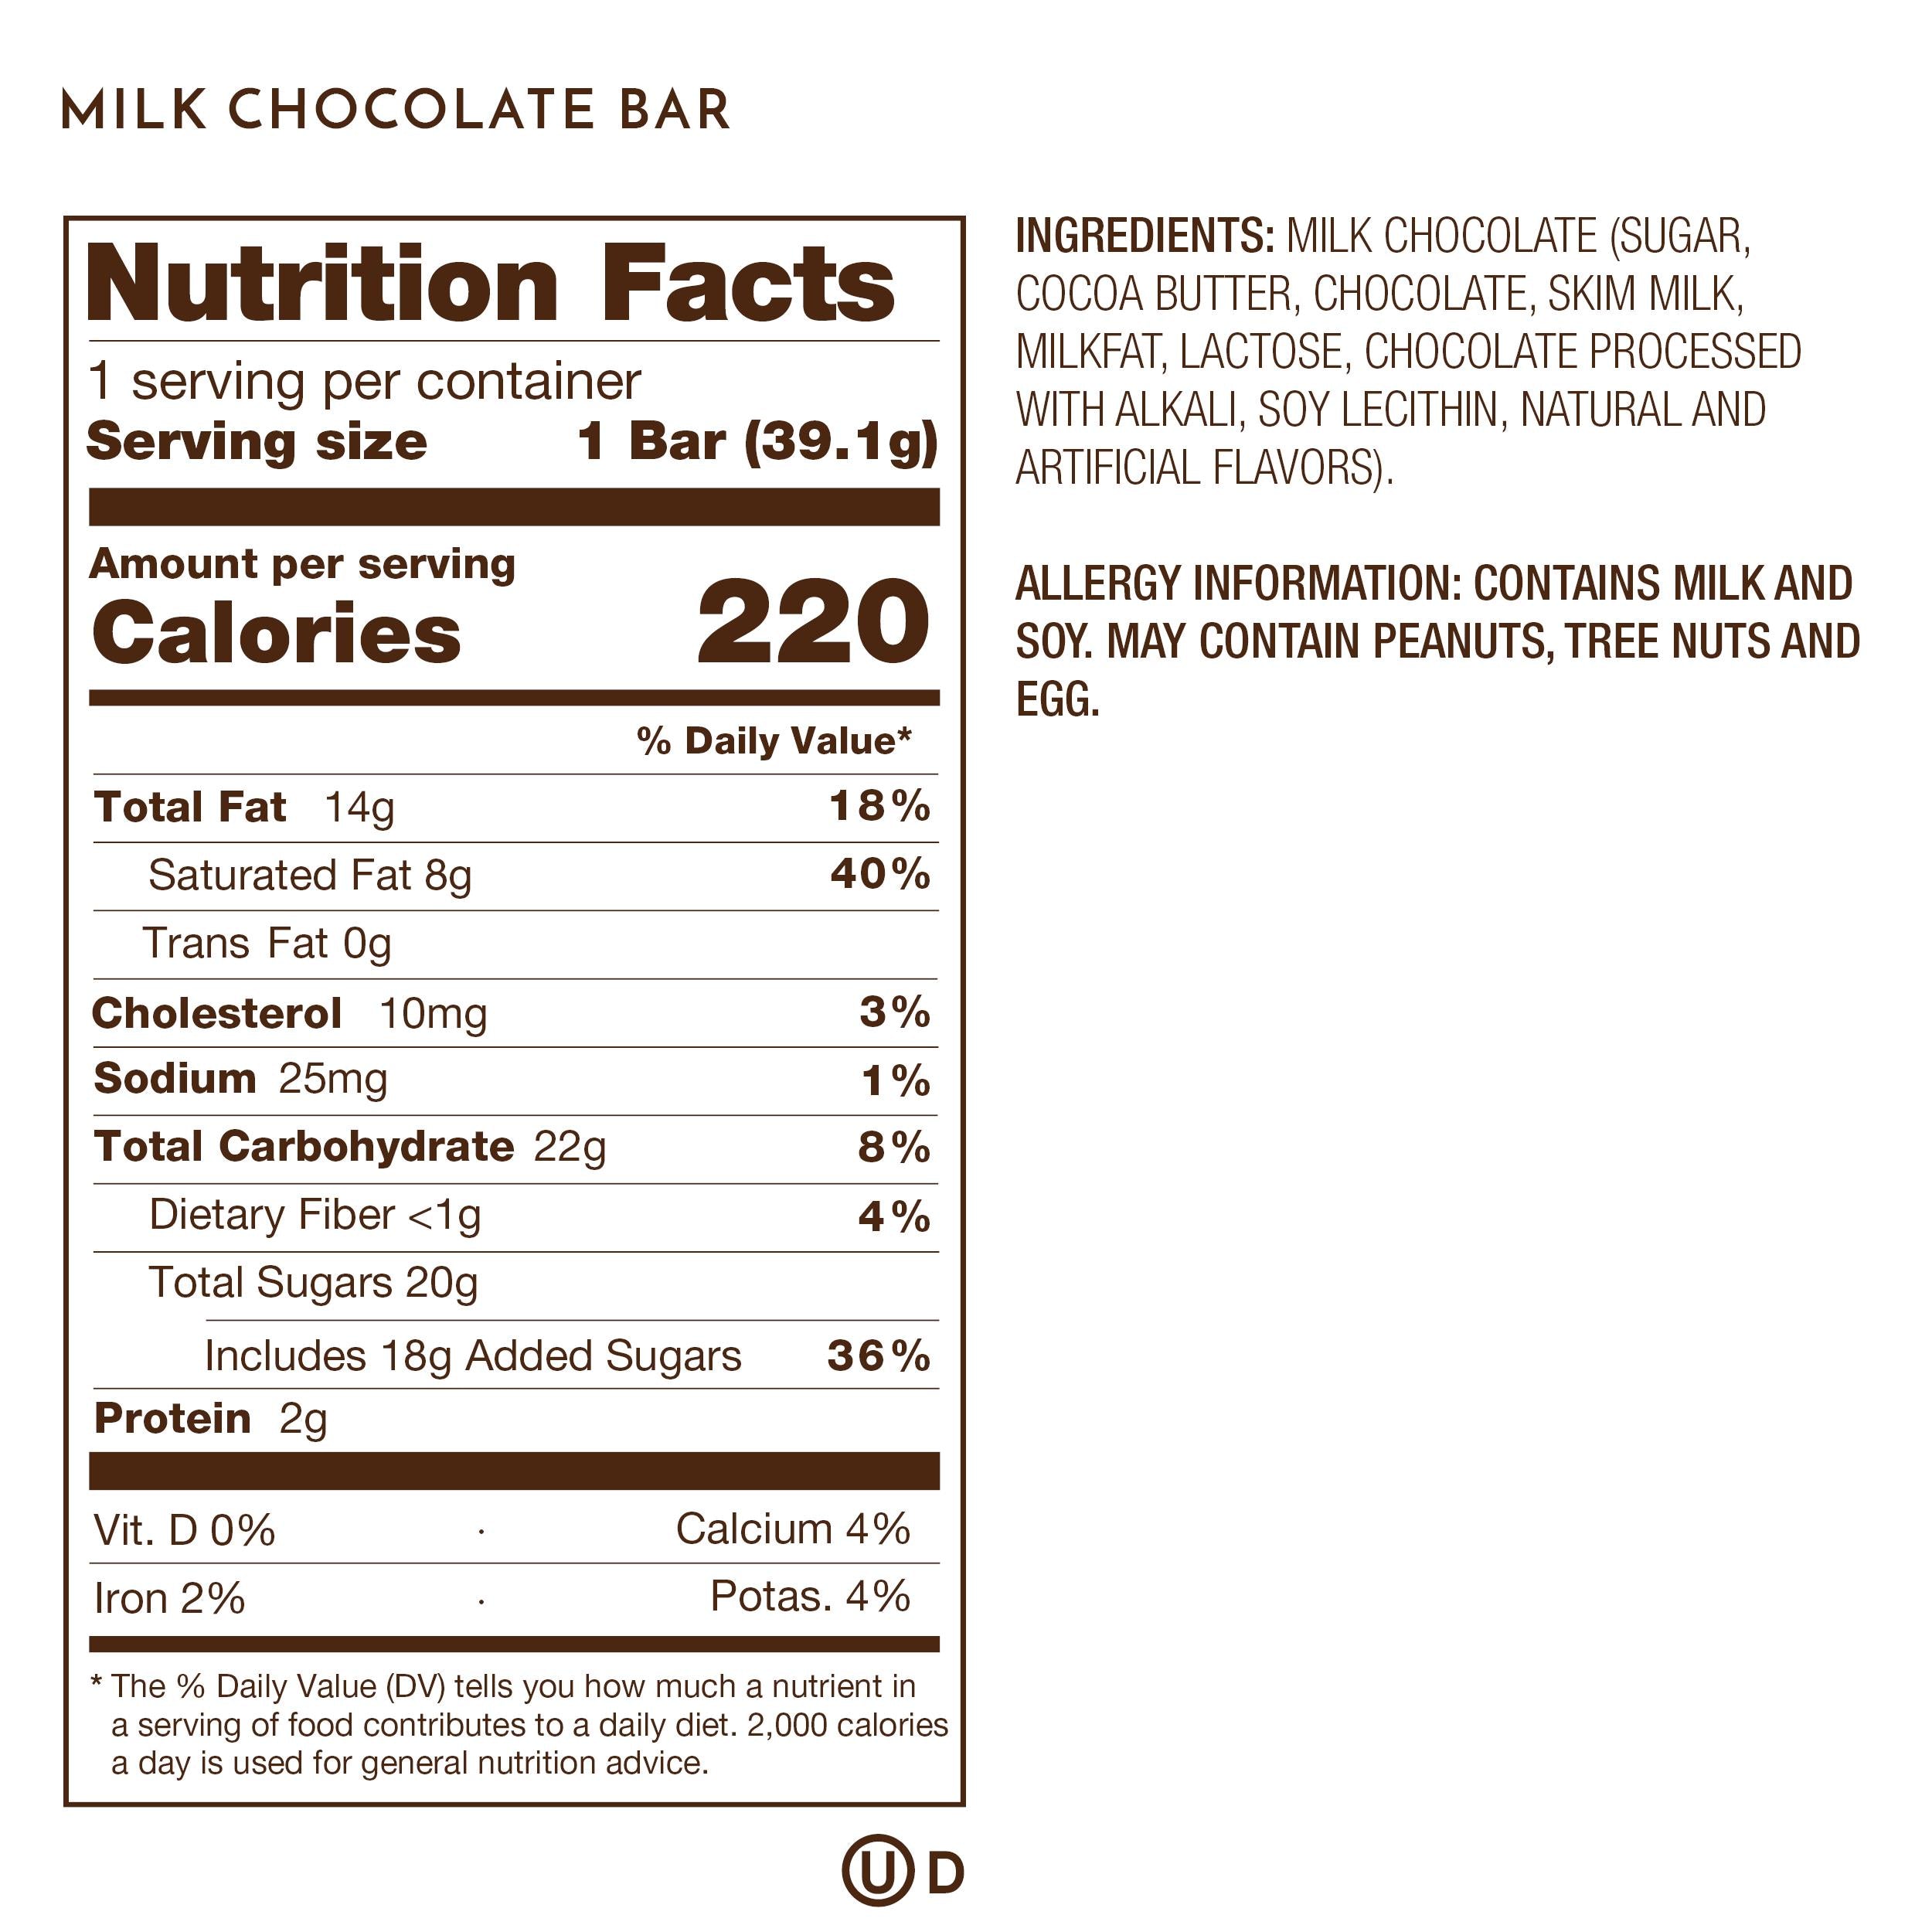 Nutrition Facts, Allergy and Ingredients on Premium Milk Chocolate Bars.